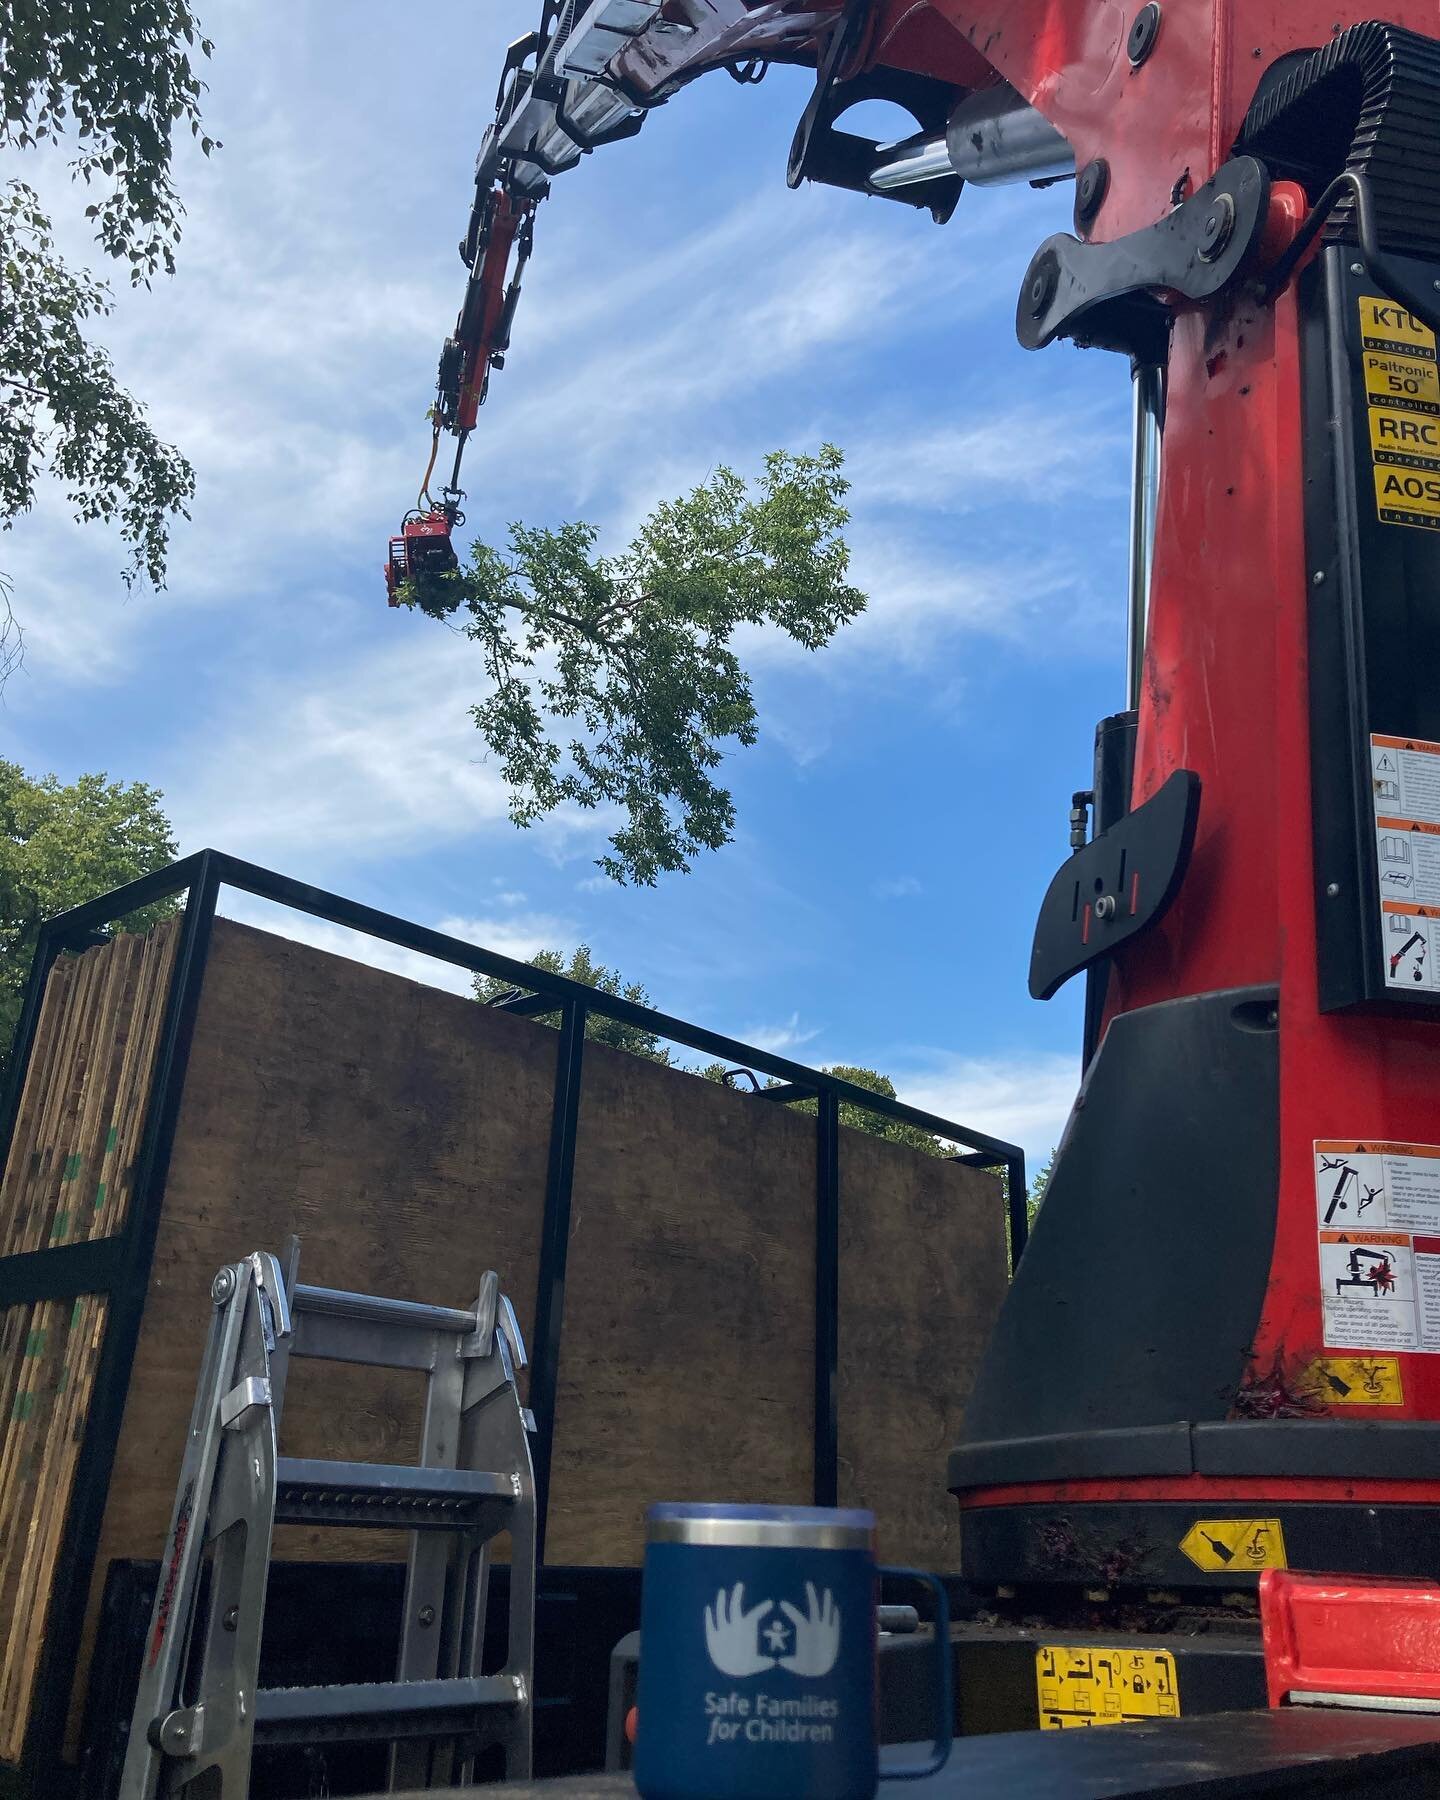 3 good size removals from 1 setup is never a bad thing. Wouldn&rsquo;t want to do it without the Treemek. Ash was growing within inches of the roofline. Great cutting by Sam to keep everything in one piece! Thanks to @safefamiliesmke for keeping the 